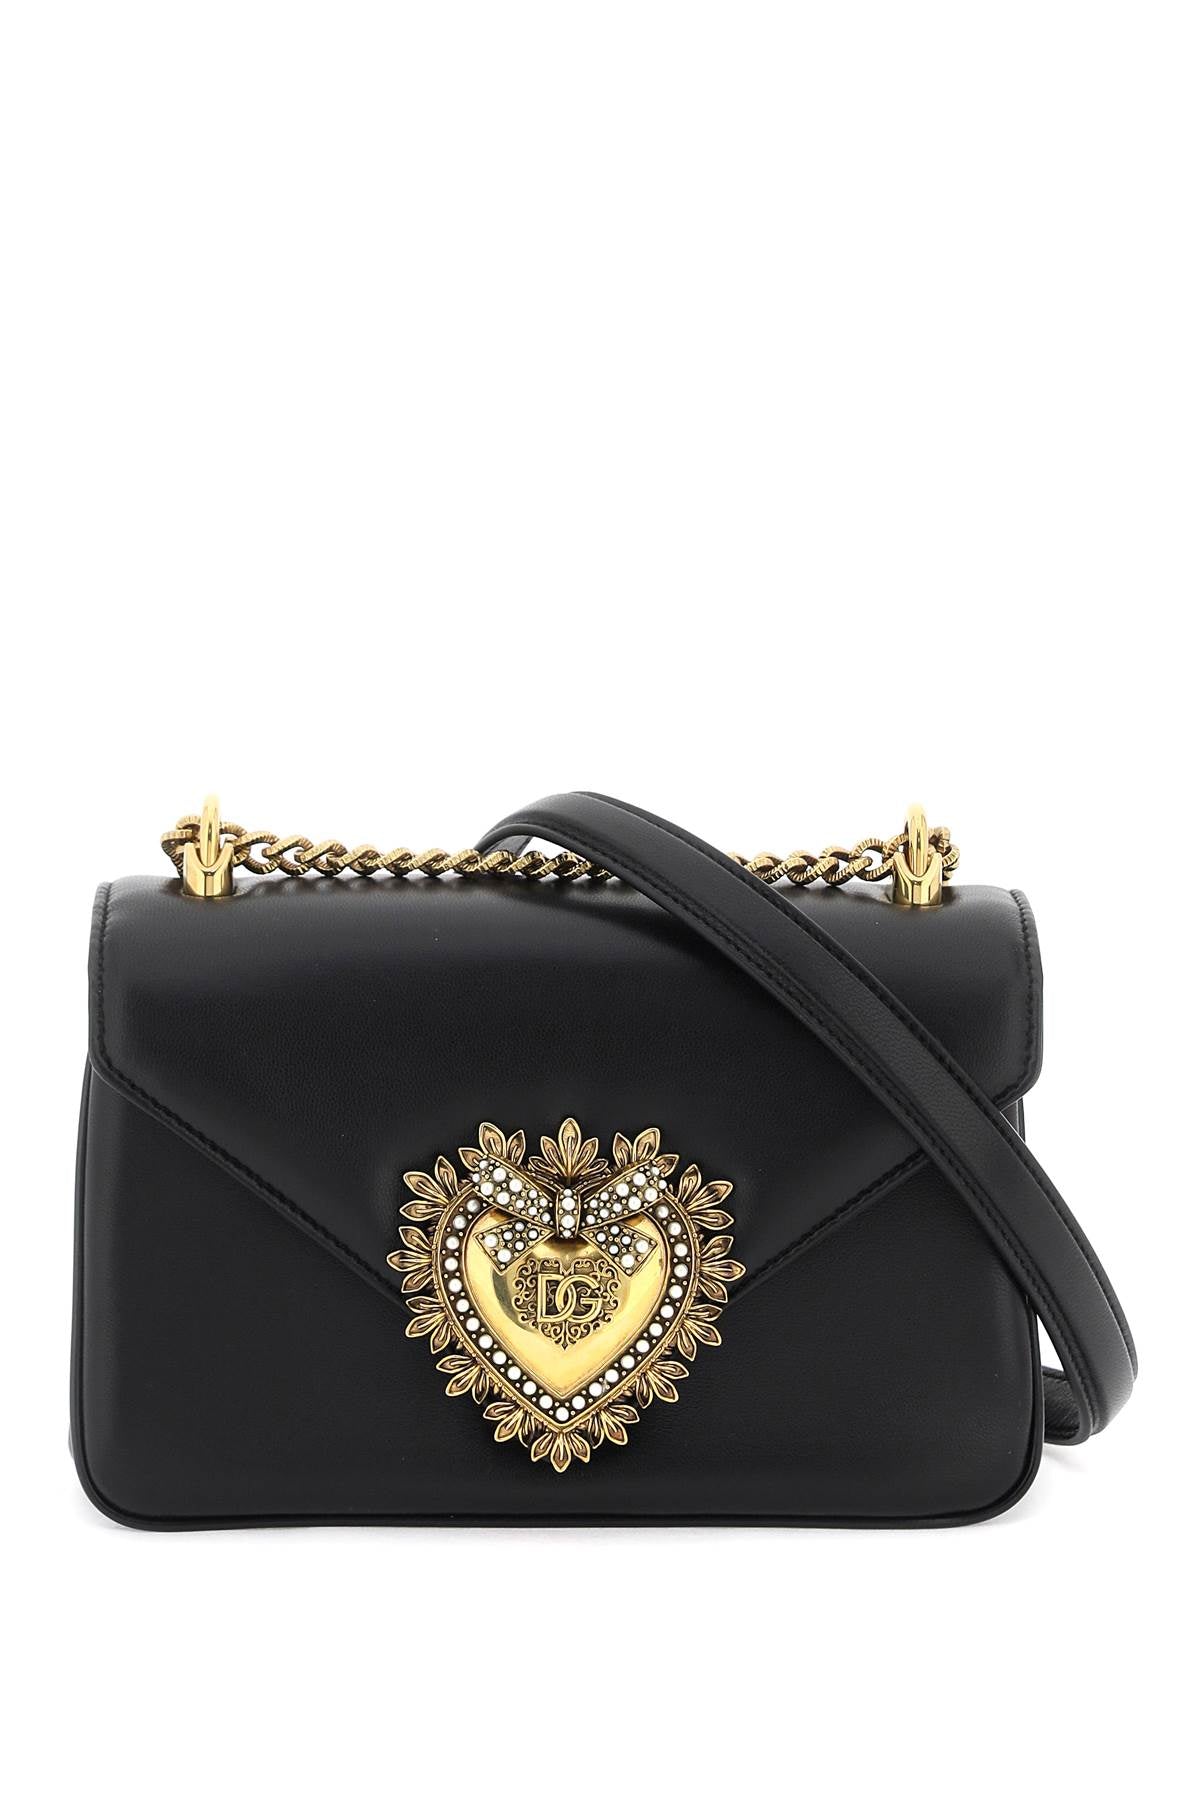 Black Leather Shoulder Bag with Handmade Sacred Heart and Decorative Pearls